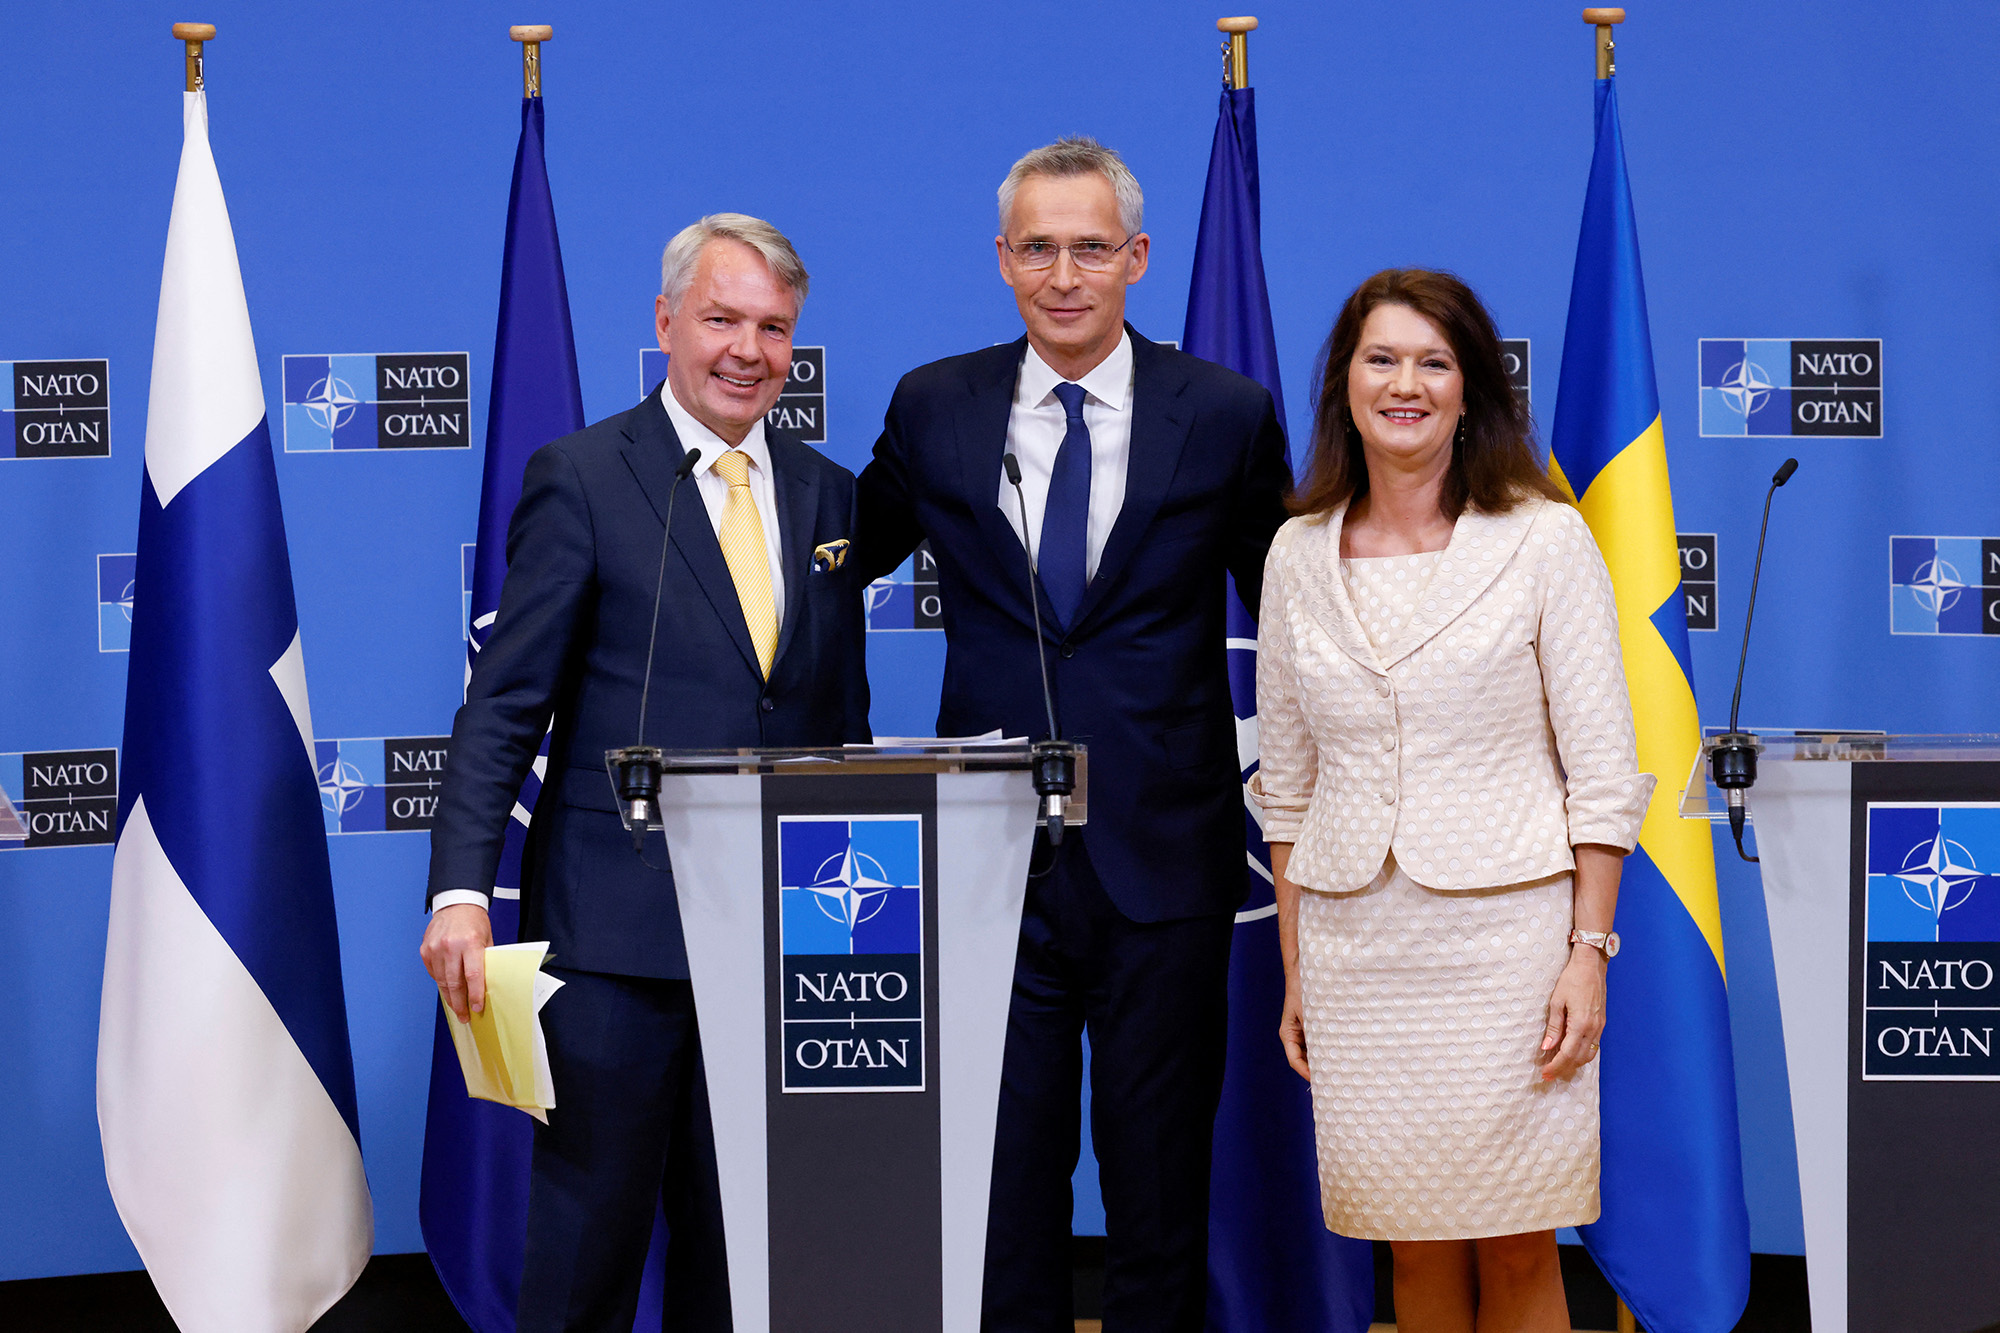 Sweden's Foreign Minister Ann Linde, right, and Finland's Foreign Minister Pekka Haavisto, left, attend a news conference with NATO Secretary General Jens Stoltenberg, after signing their countries' accession protocols at the alliance's headquarters in Brussels, Belgium, on July 5.